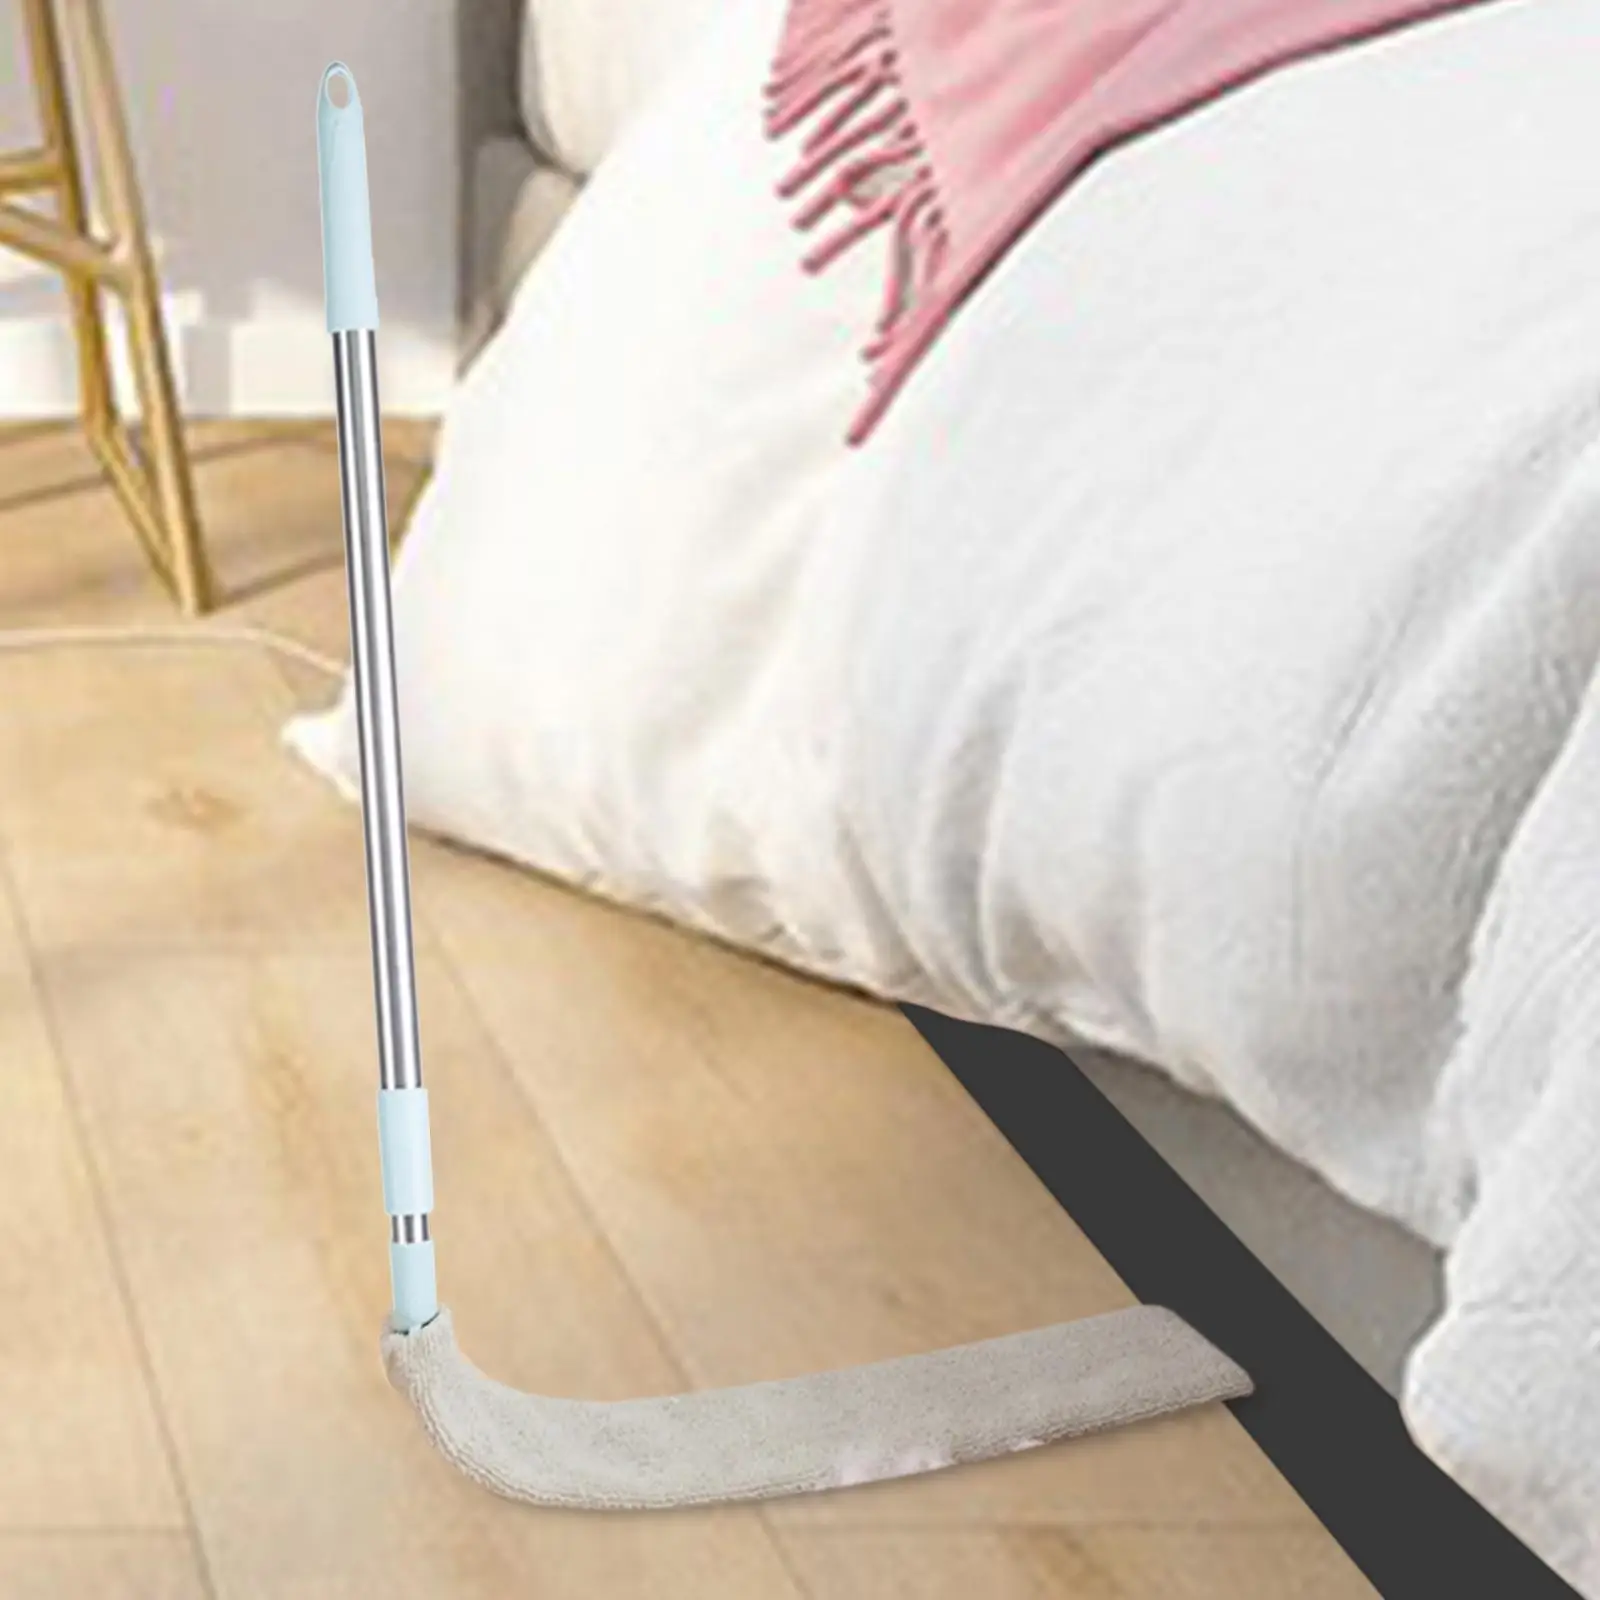 Retractable Gap Dust Brush Cleaner with Extension Pole for Wet and Dry Dusters for Cleaning for Car Blinds Furniture Bottom